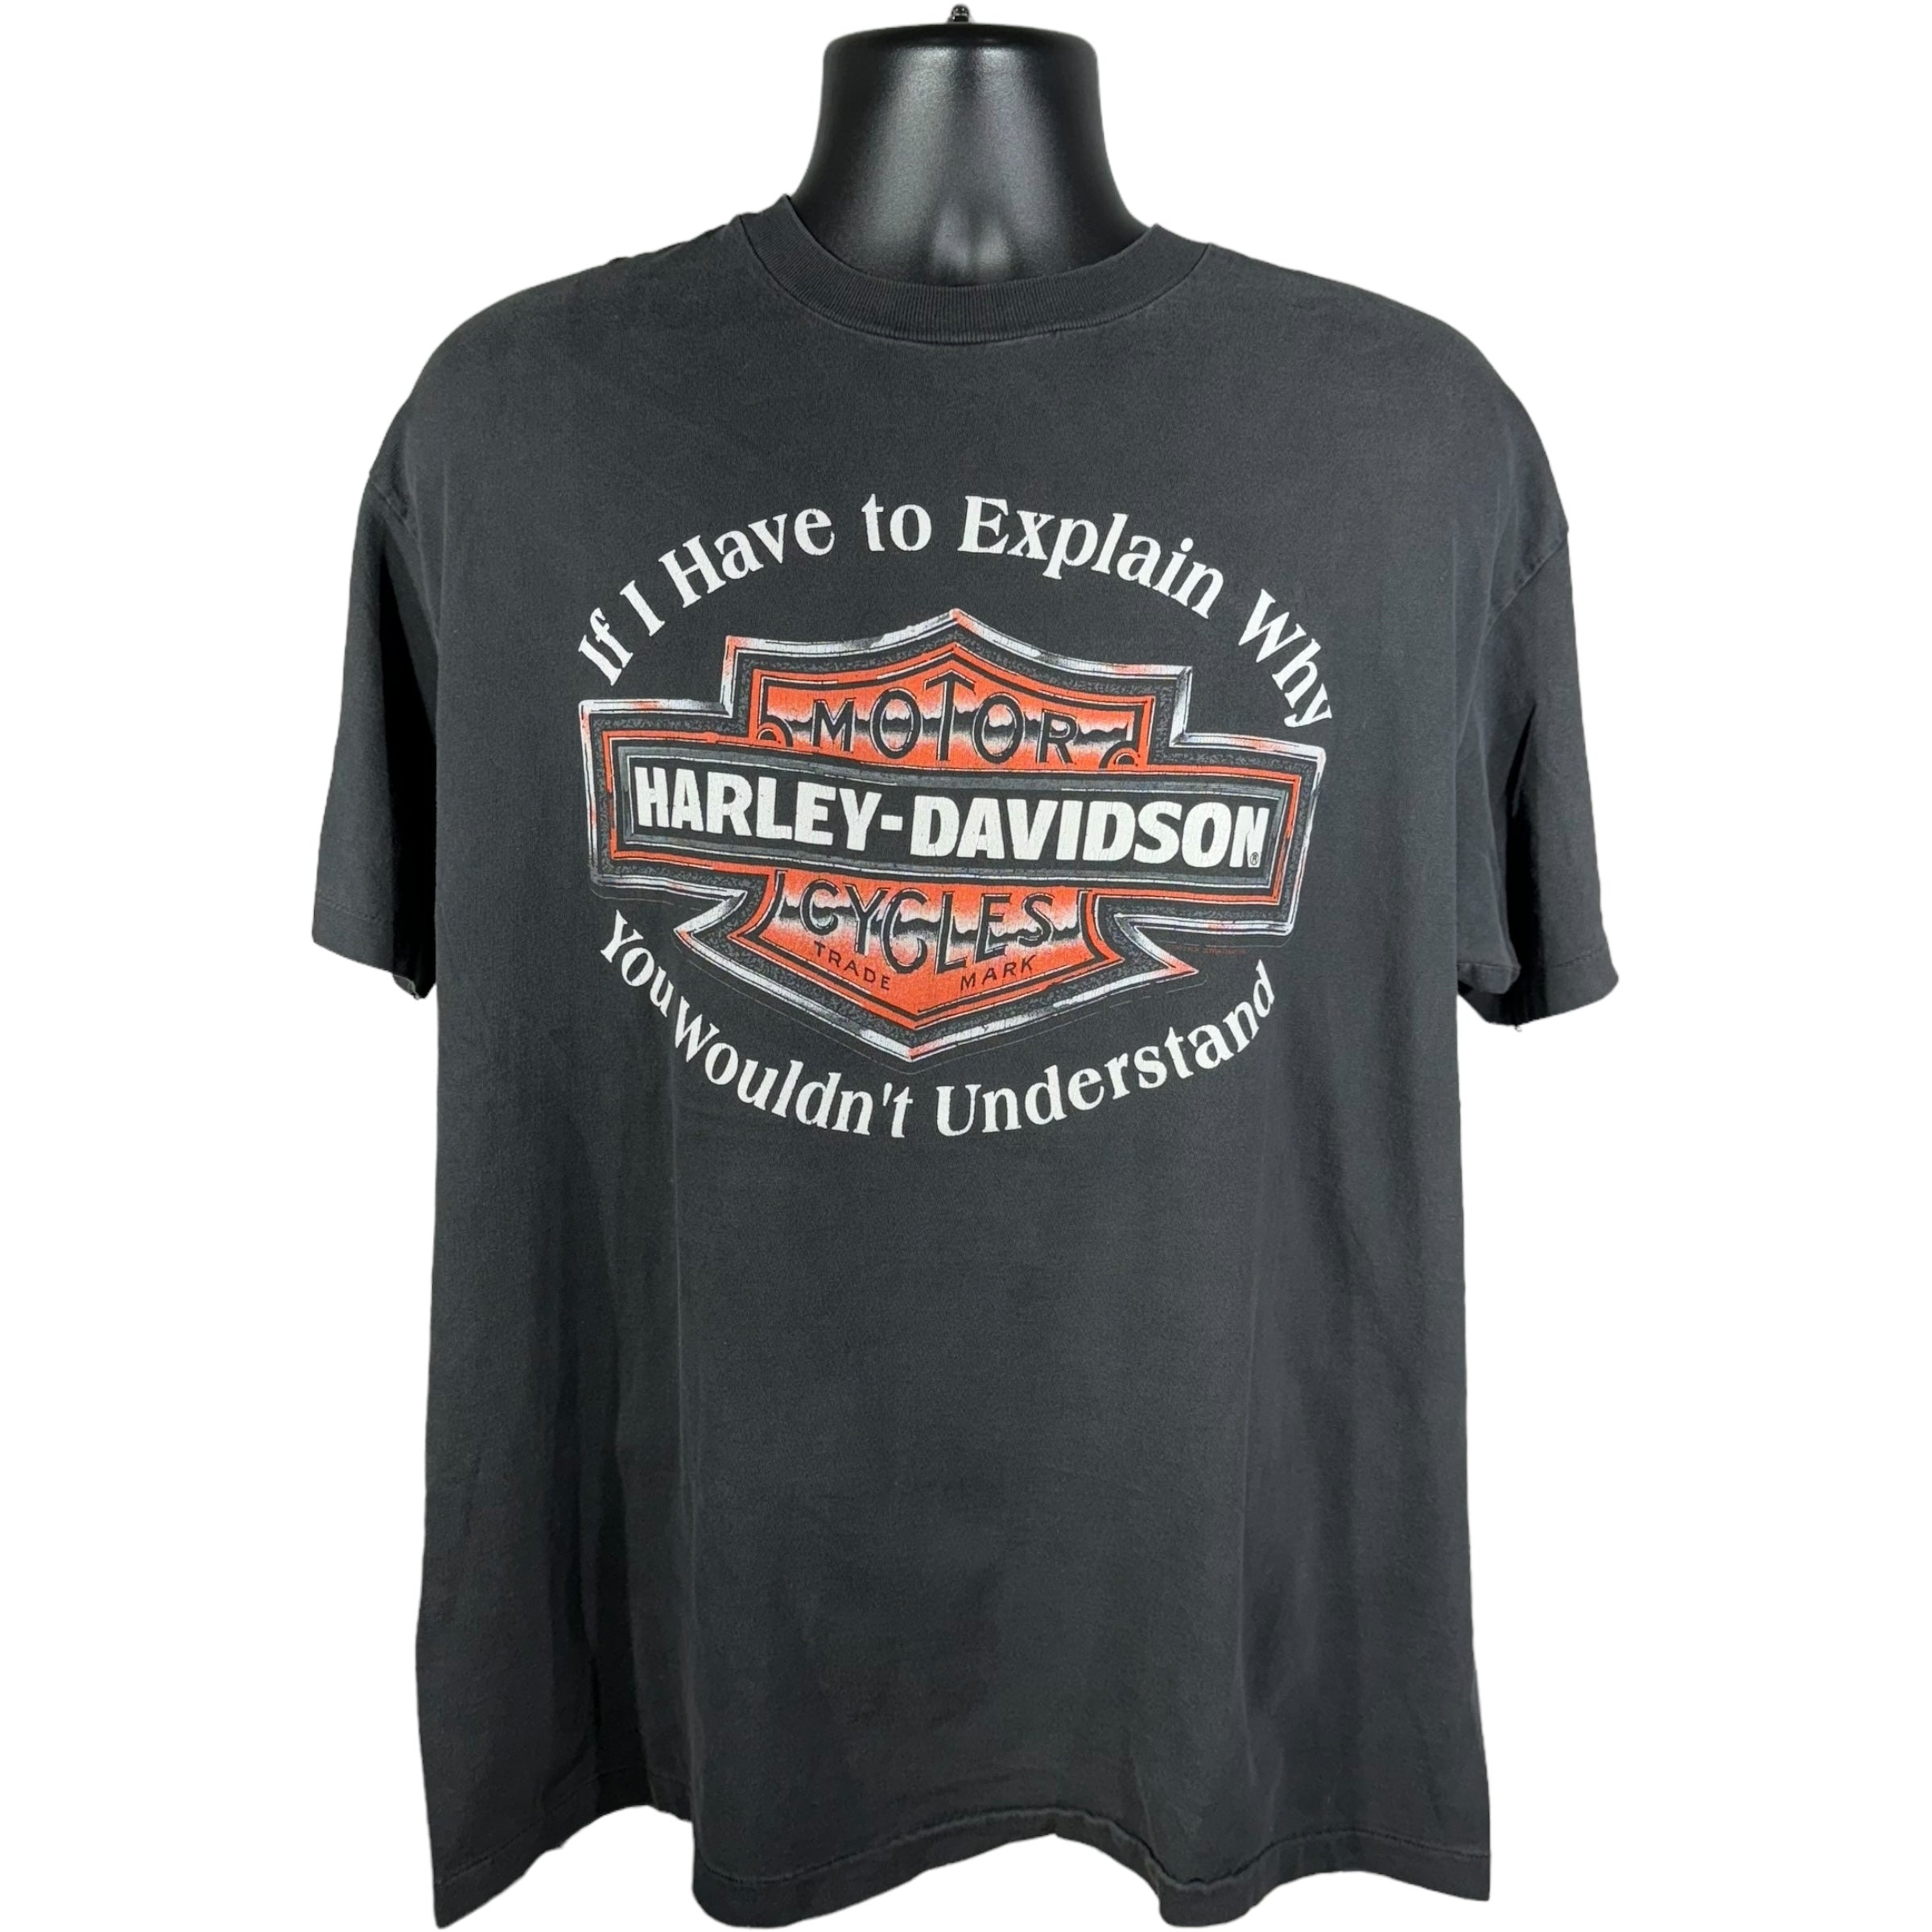 Vintage Harley Davidson "If I Have To Explain Why" Tee 1987